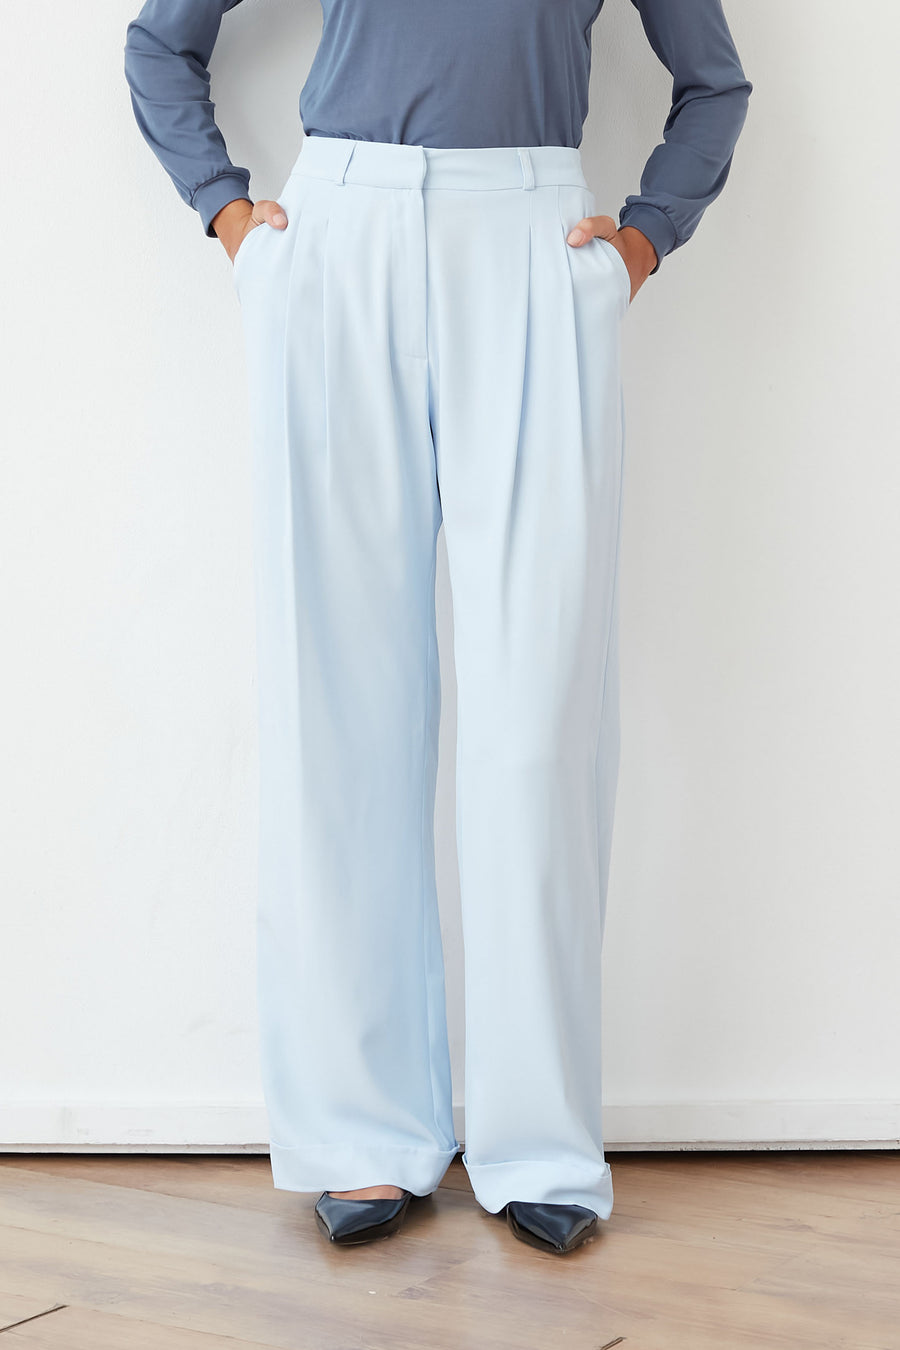 SMEE TROUSERS LIGHT BLUE